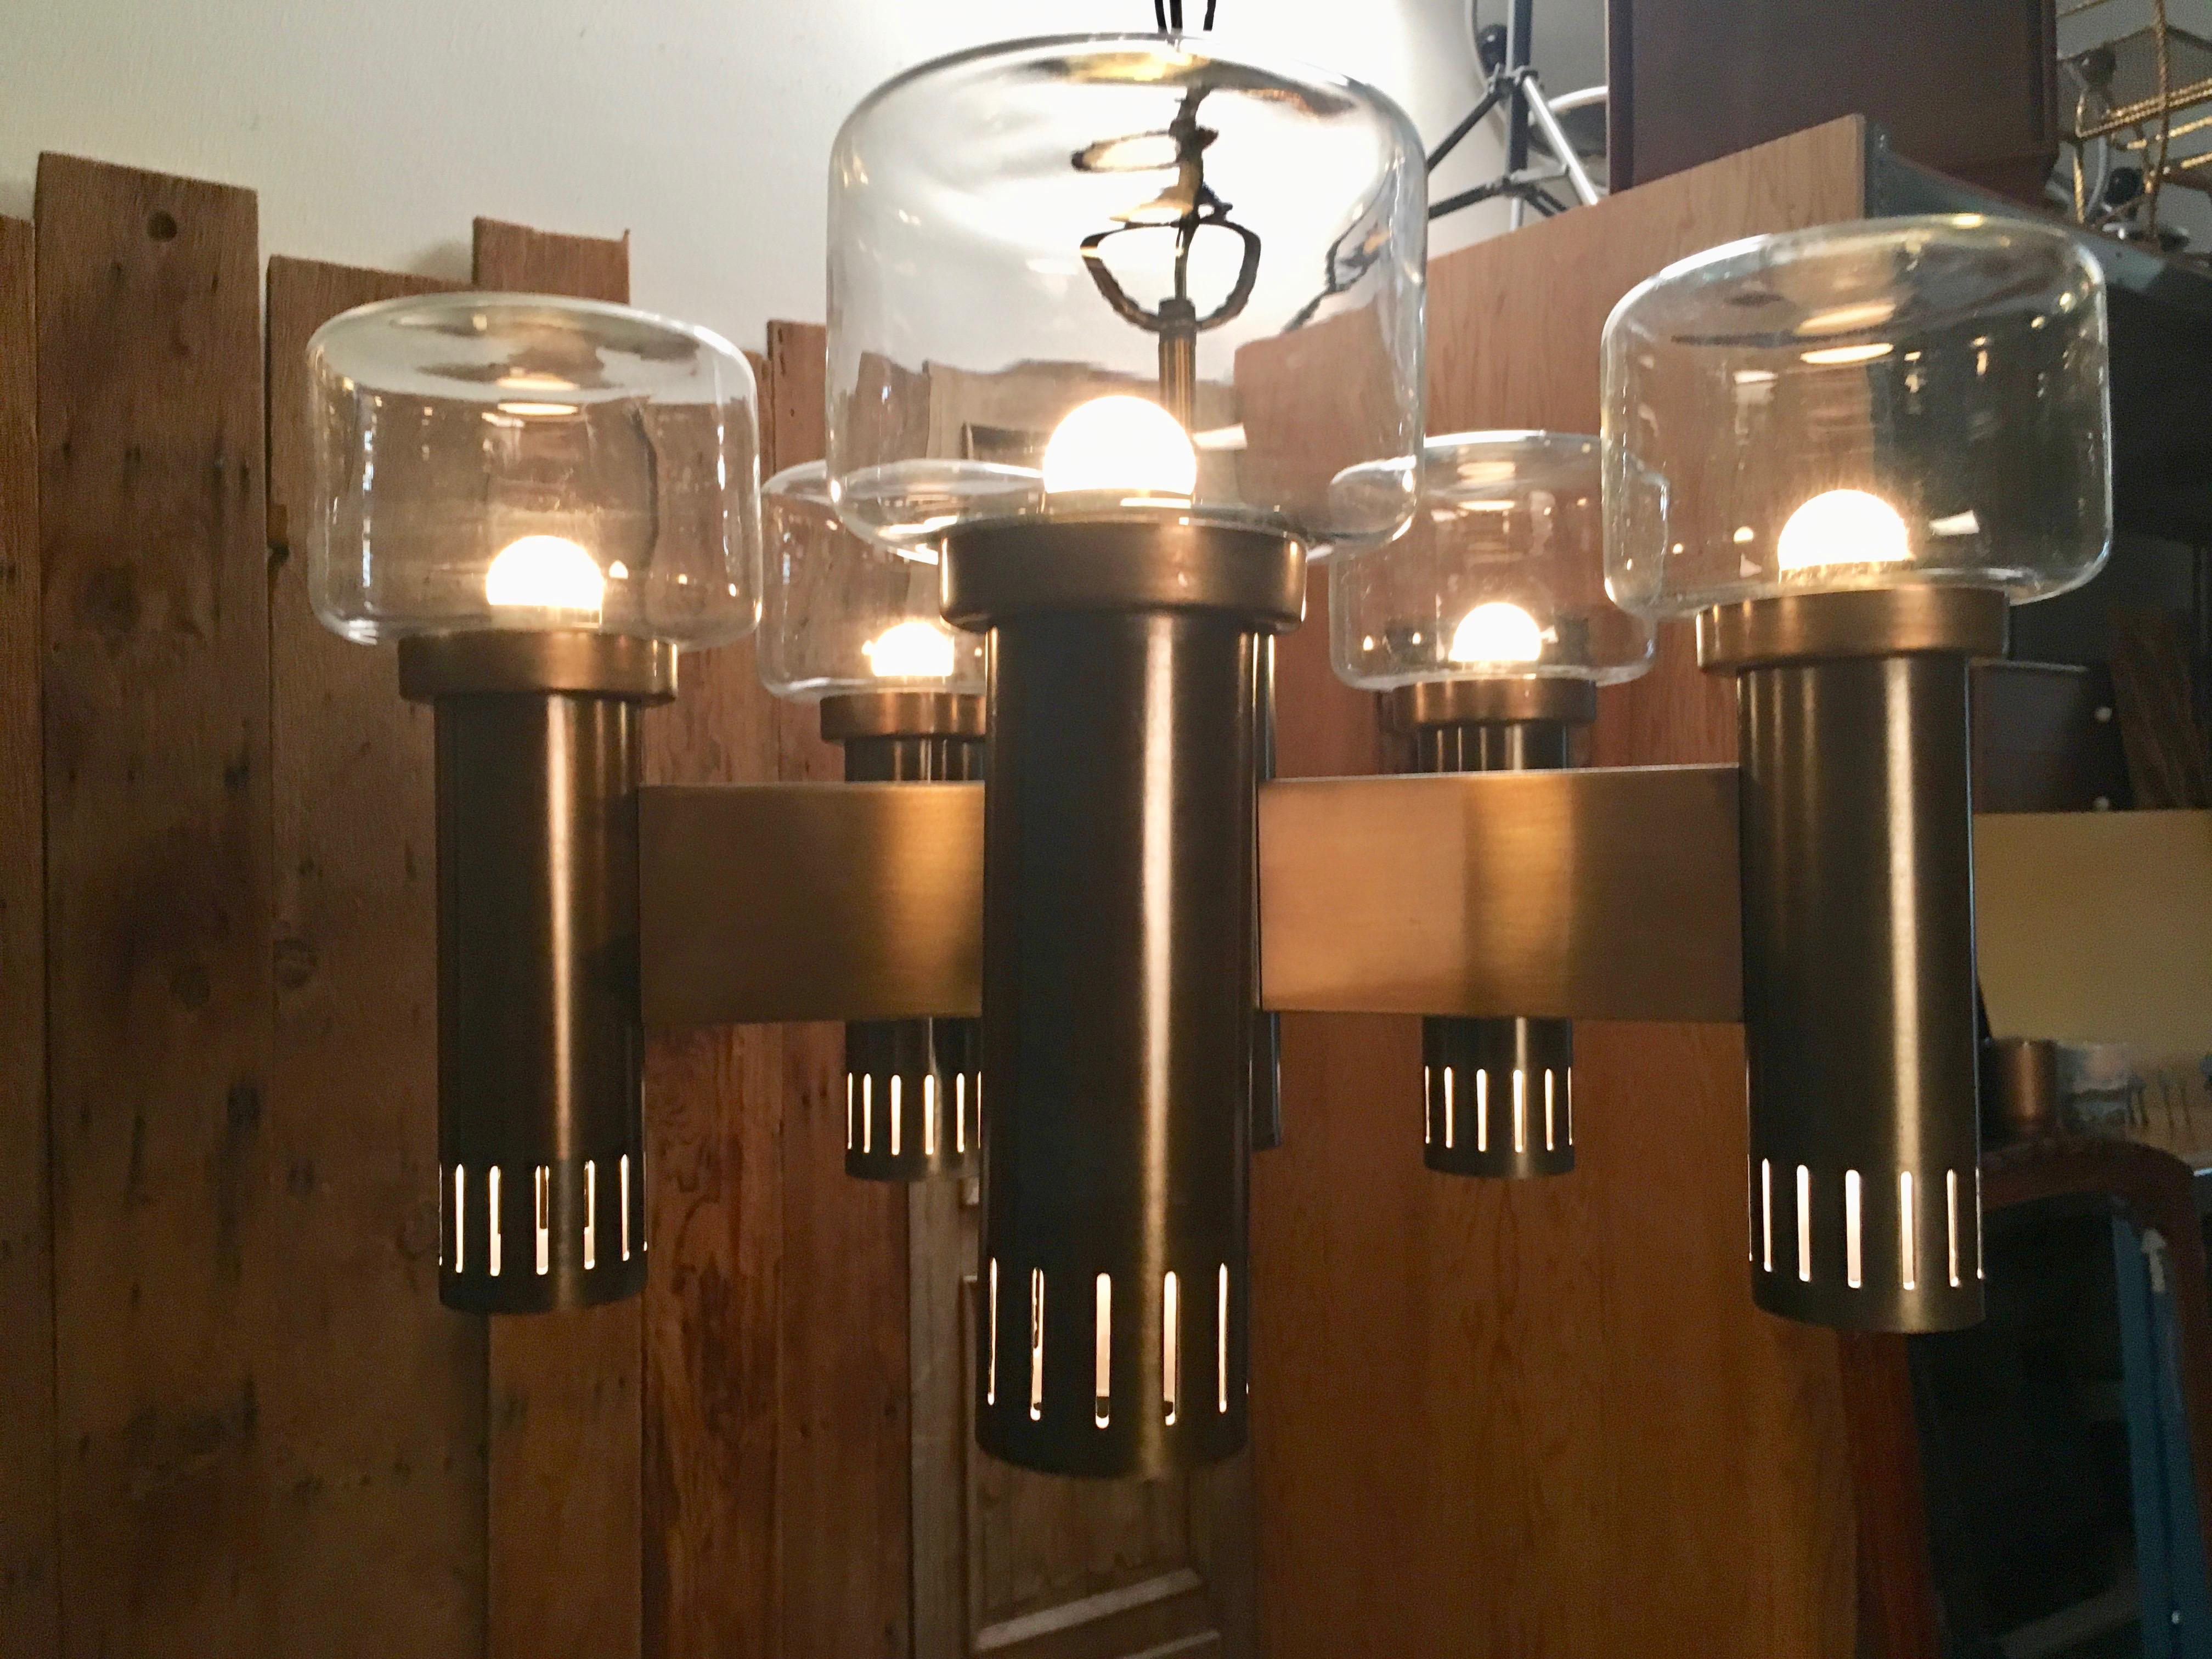 Bronze finish with round flat top glass also down lighting in side the tubes.